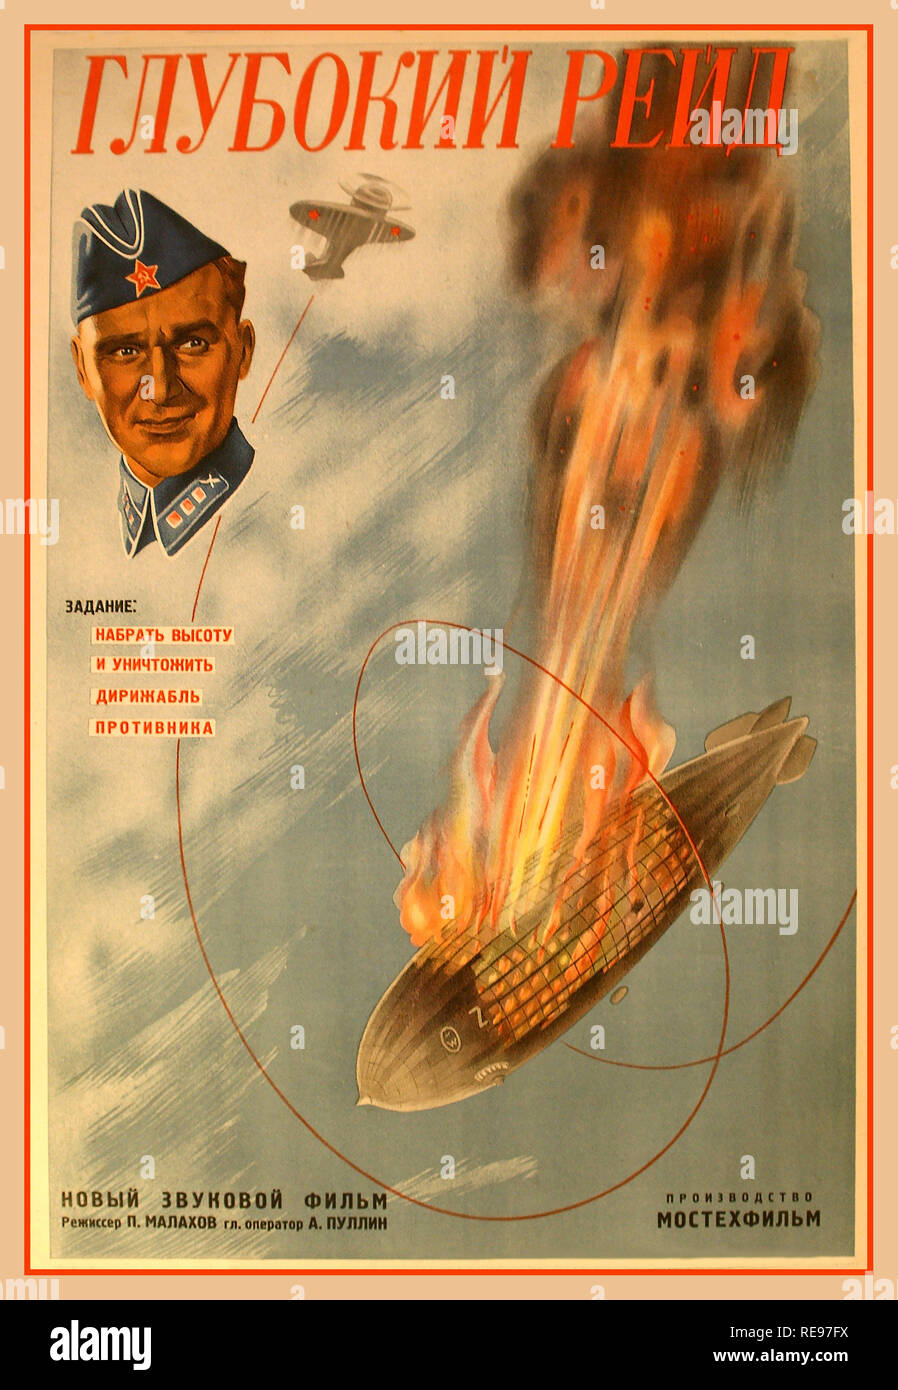 1930's Vintage Soviet Russian Film Poster Original vintage propaganda movie poster for a film, 'Deep Raid'  The caption on the poster reads 'Brief: gain altitude and destroy the zeppelin of the enemy.'  The airship pictured is most likely an LZ 130 Graf Zeppelin II that was built after the Hindenburg disaster. It was used by the Luftwaffe, Nazi Air Force, to conduct air reconnaissance over Poland and Great Britain. Given that in 1939 USSR signed non-aggression pact with Germany, most of the poster copies were destroyed Stock Photo